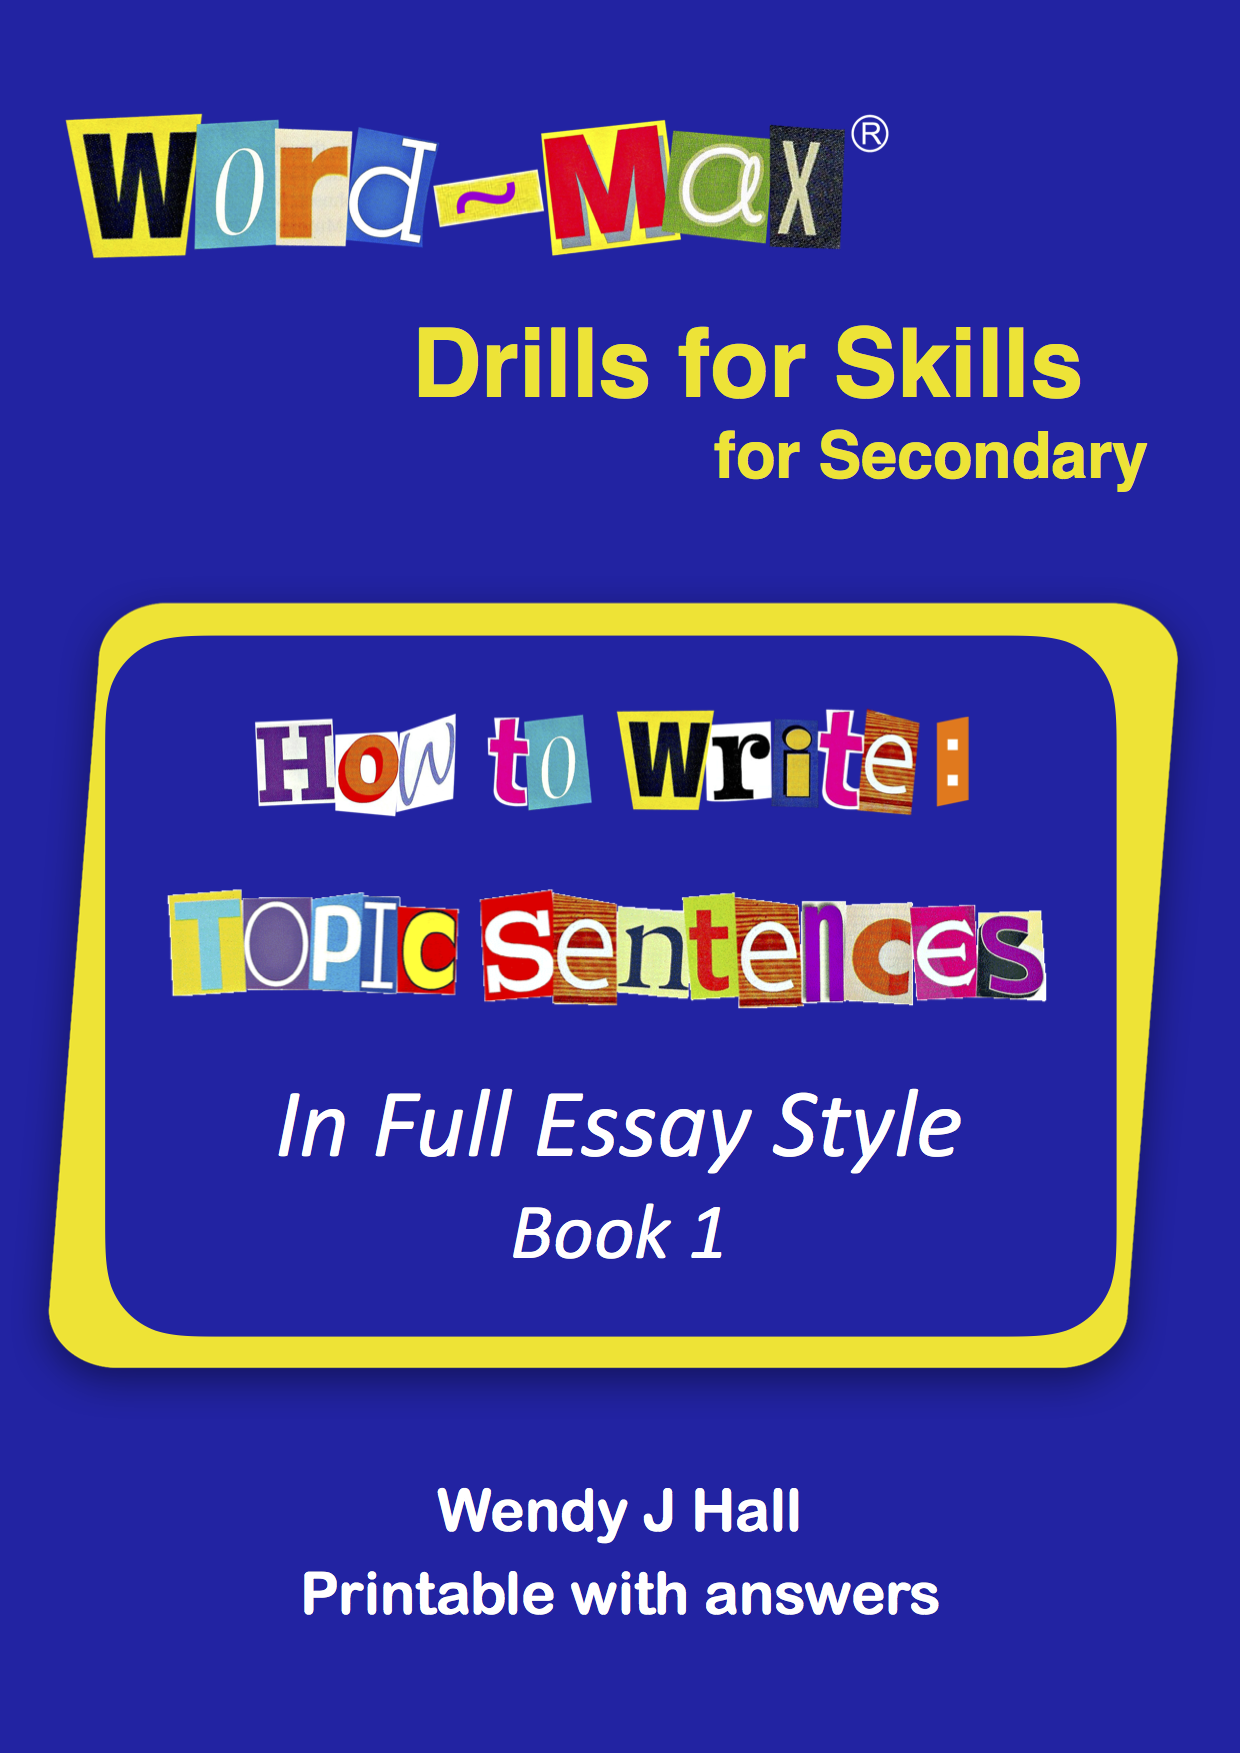 Word-Max | Drills for Skills for Secondary - How to write: Topic sentences